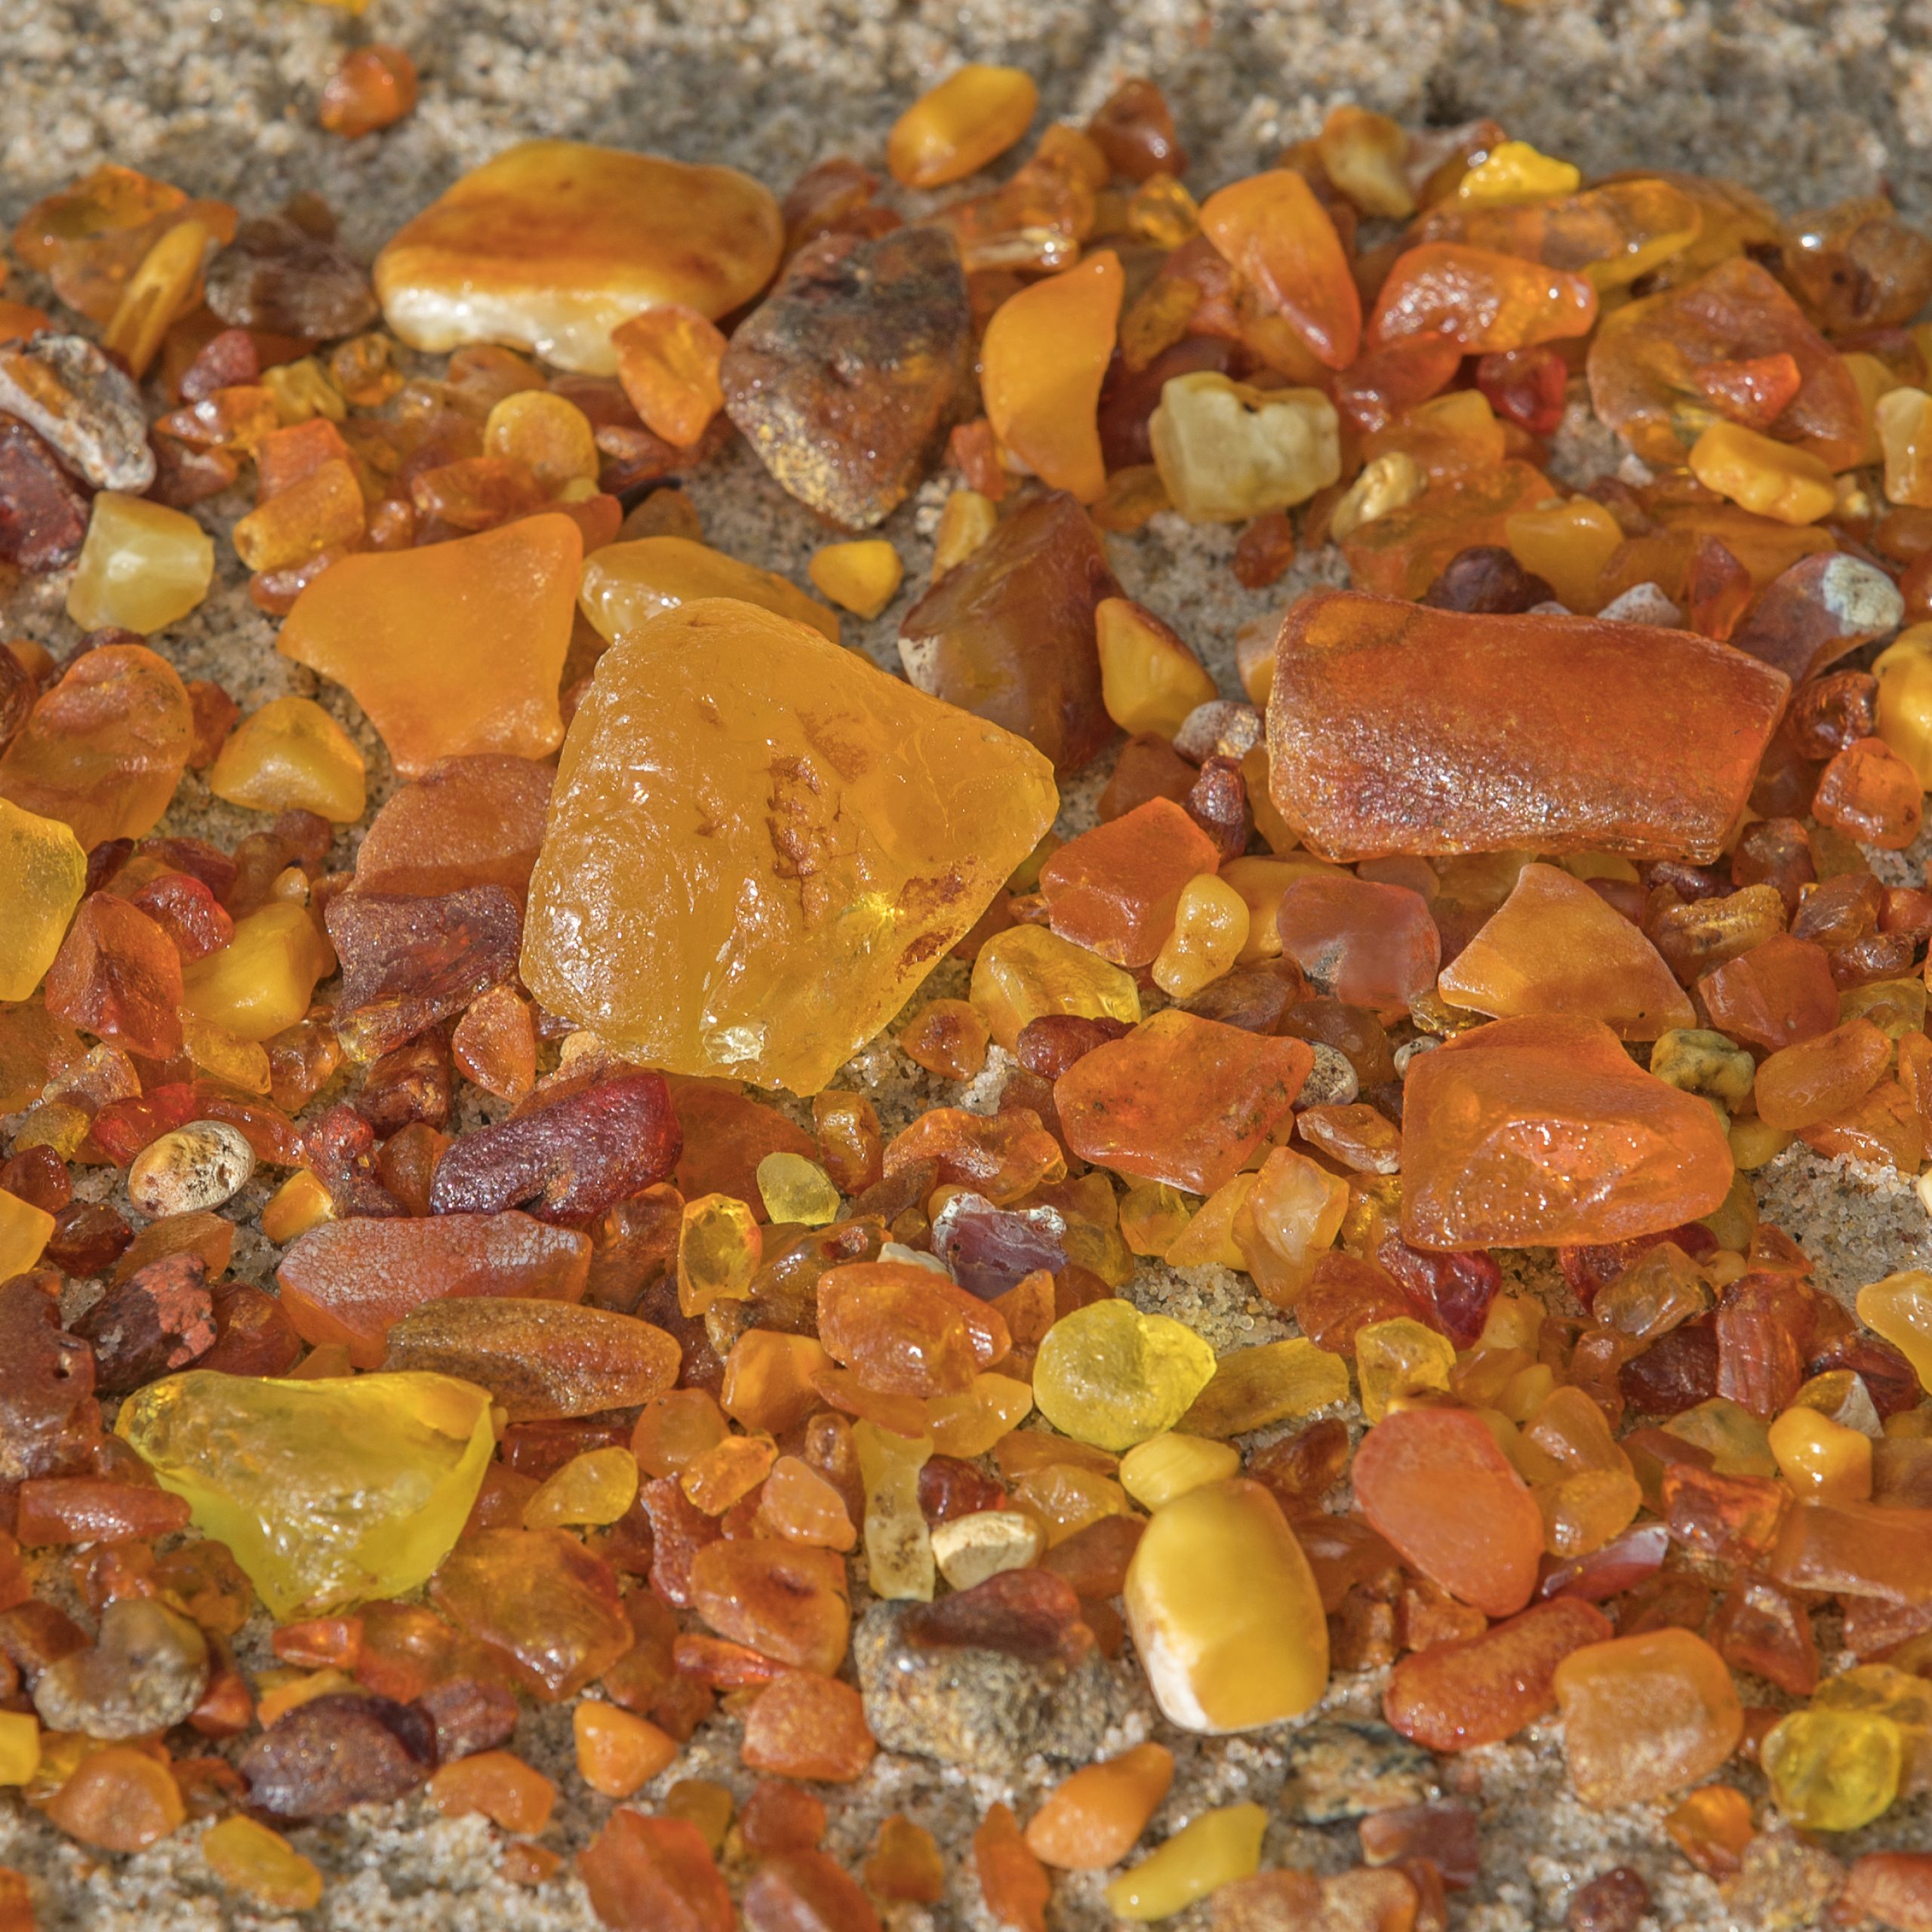 Collecting amber